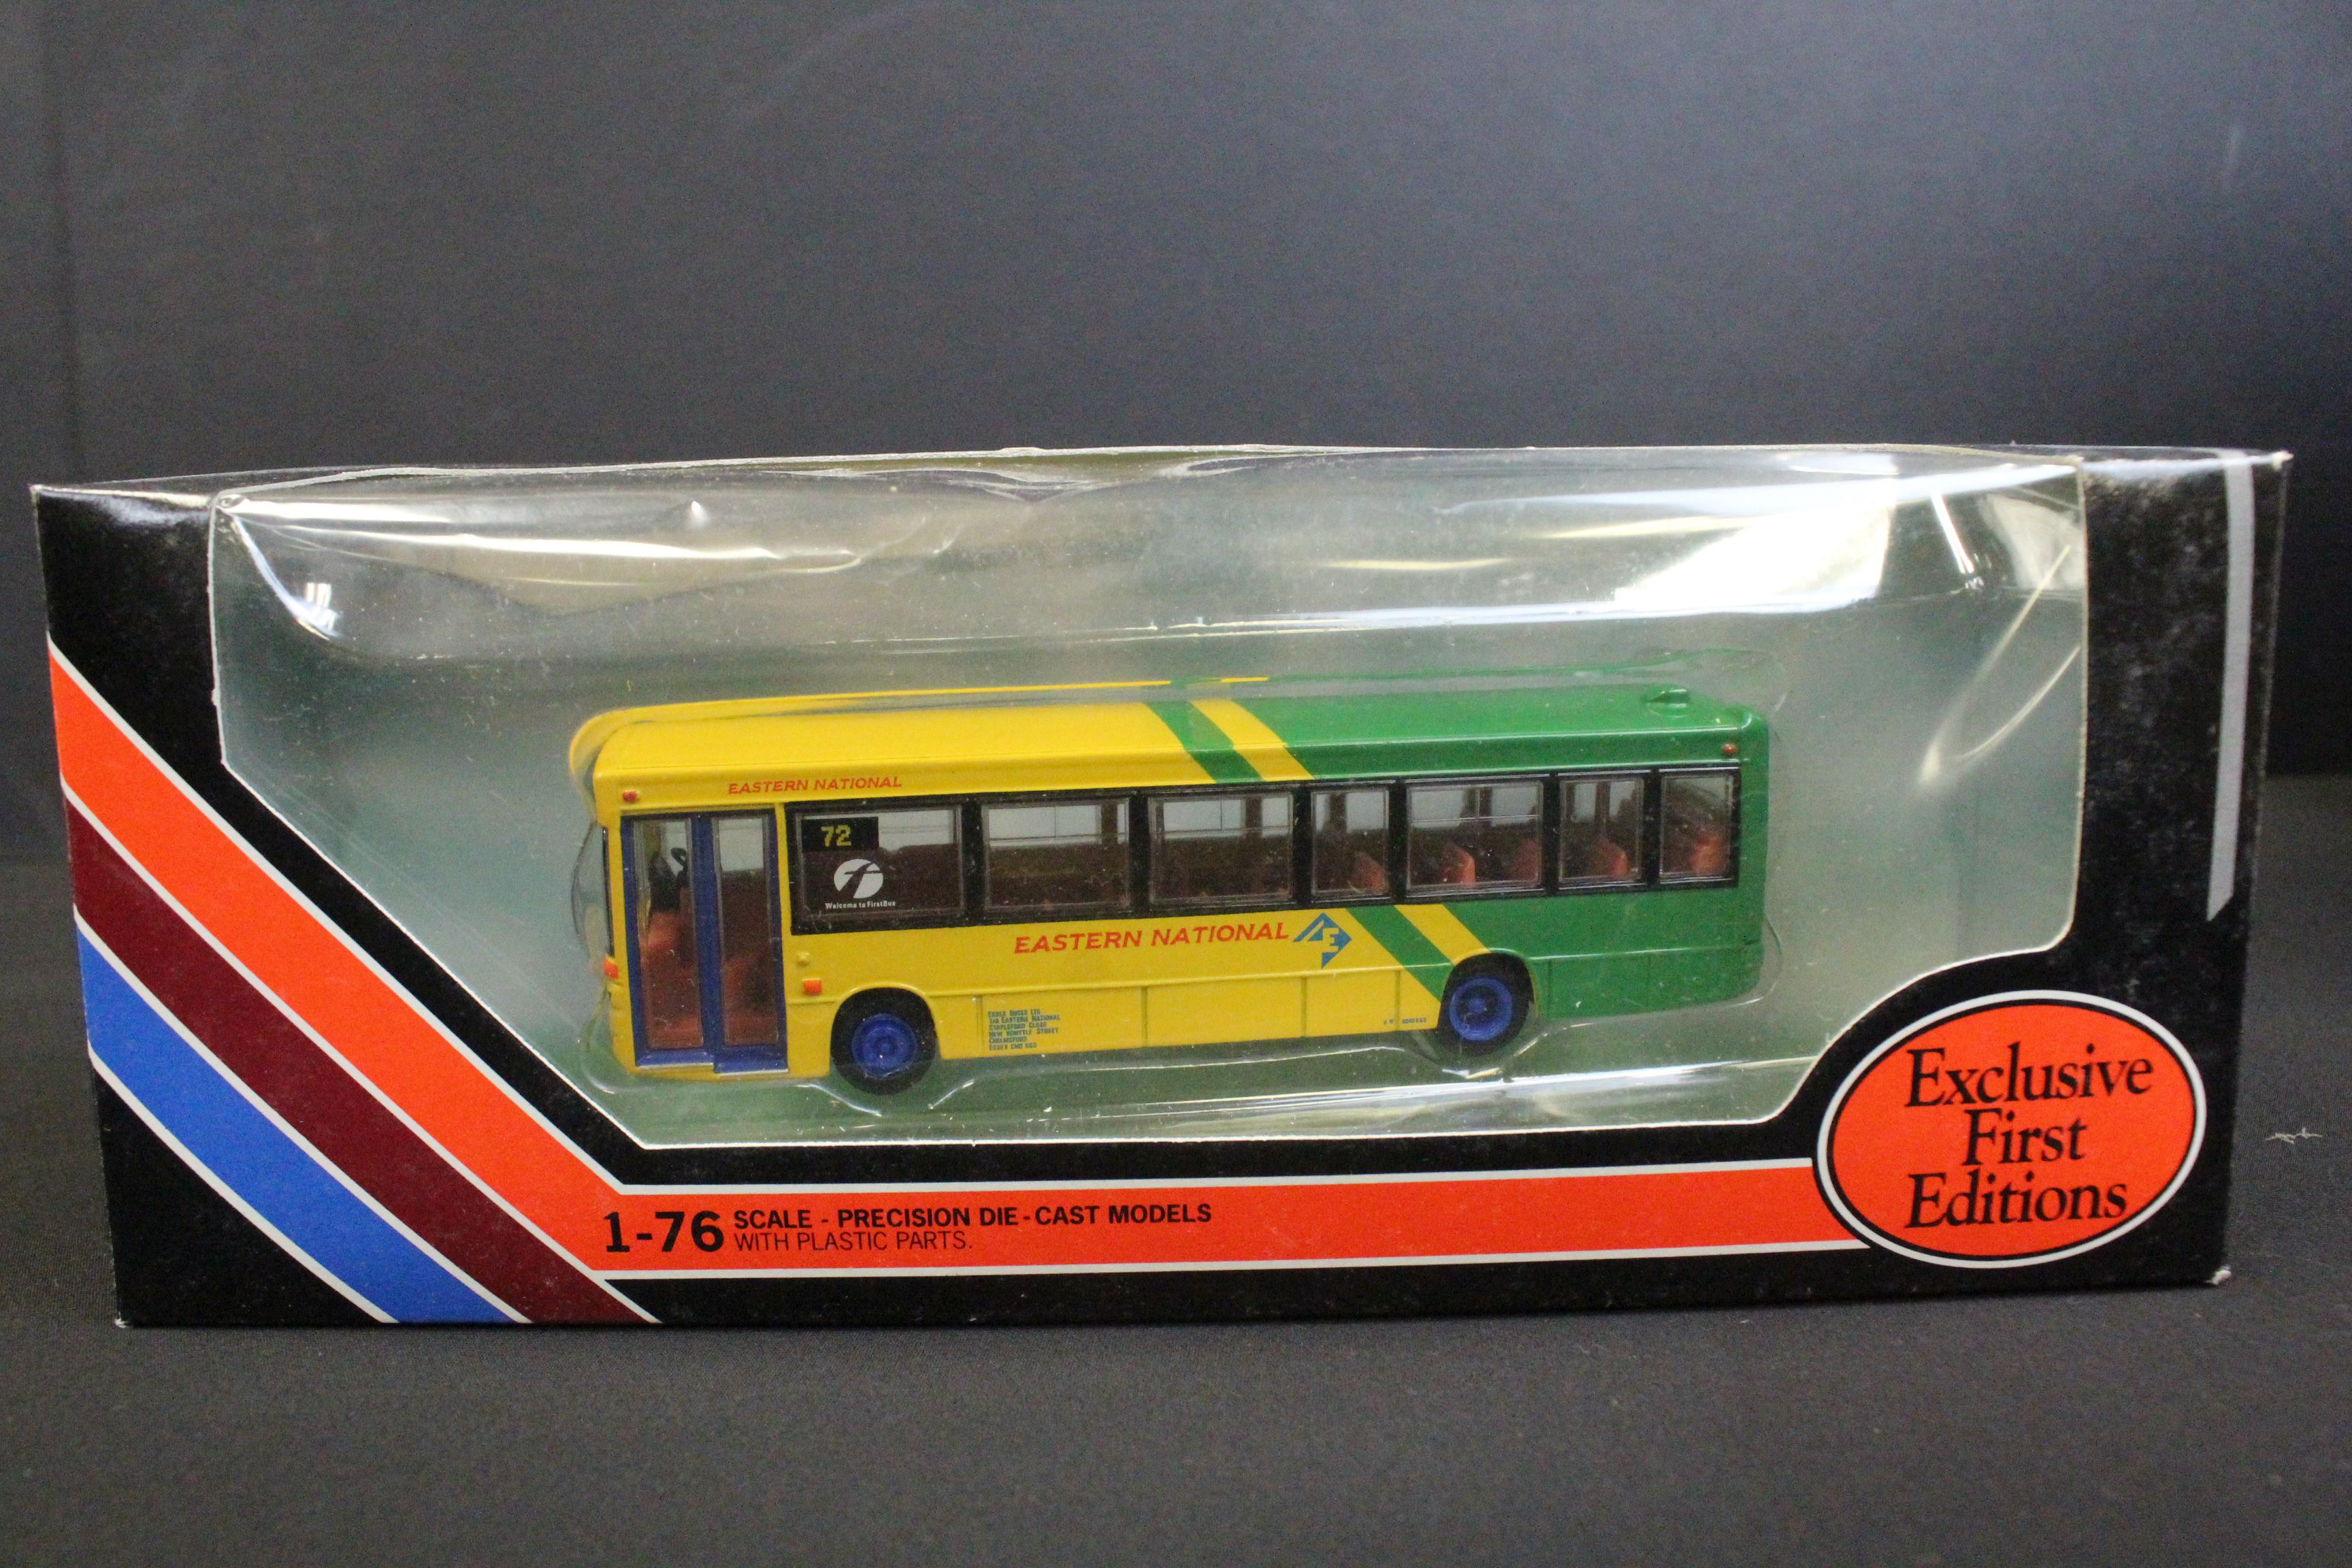 41 Boxed EFE Exclusive First Editions De-Regulation diecast model buses, diecast ex, boxes vg - Image 4 of 7